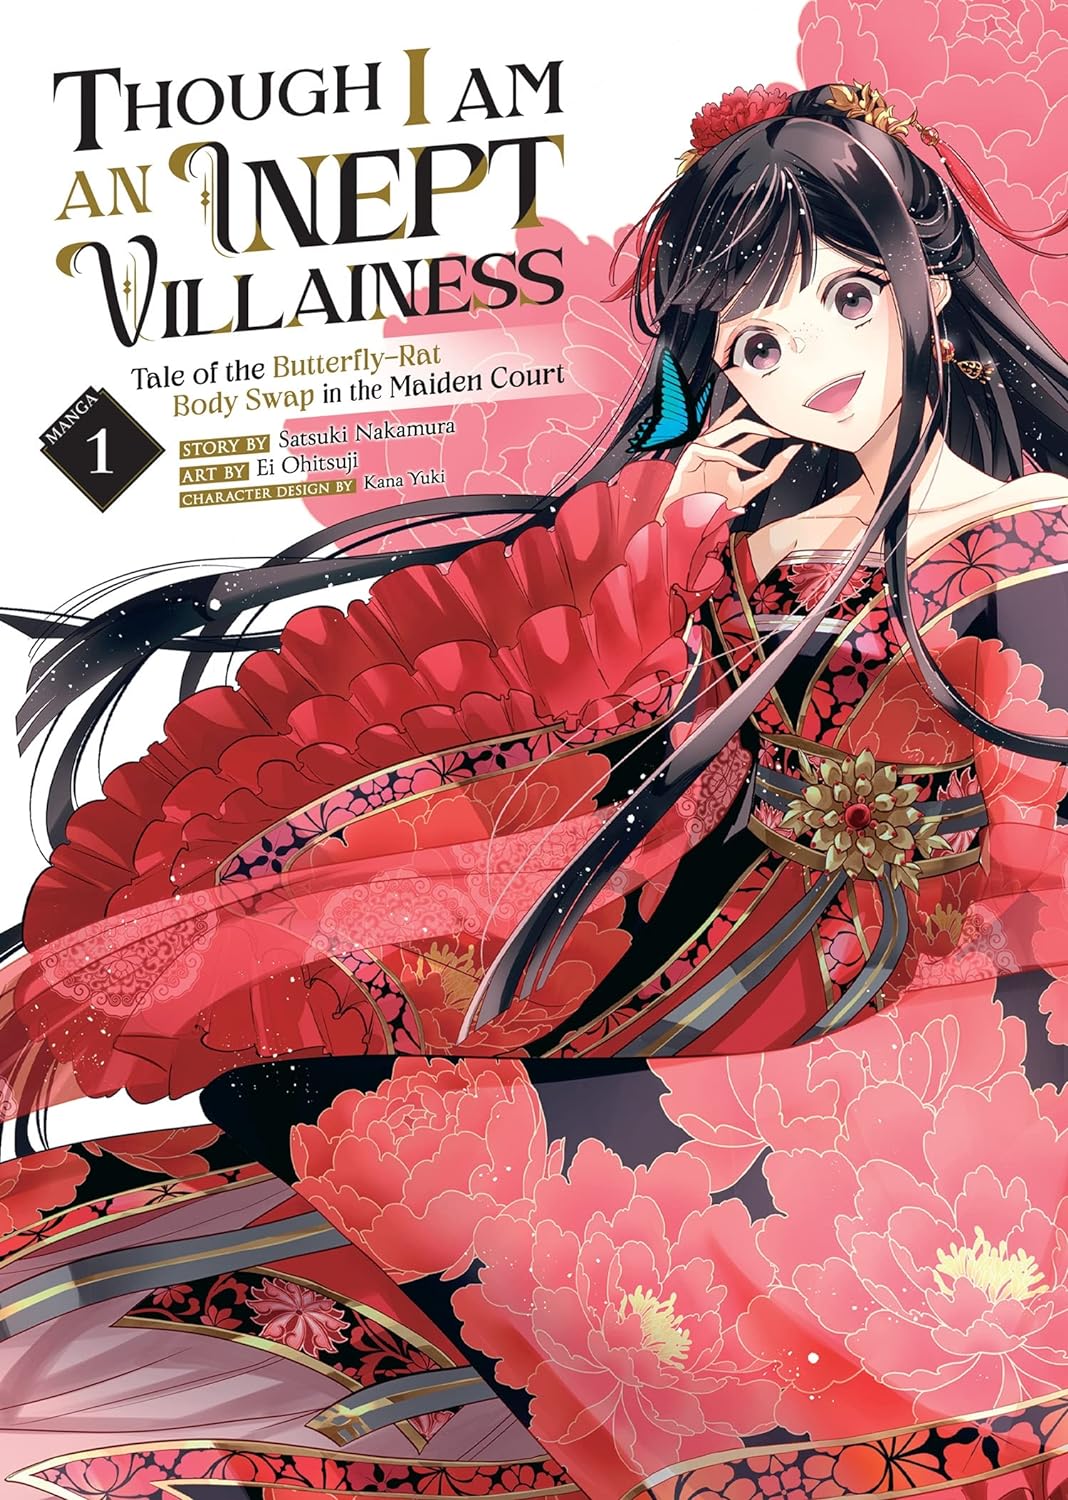 Though I Am an Inept Villainess: Tale of the Butterfly-Rat Body Swap in the Maiden Court (Manga)